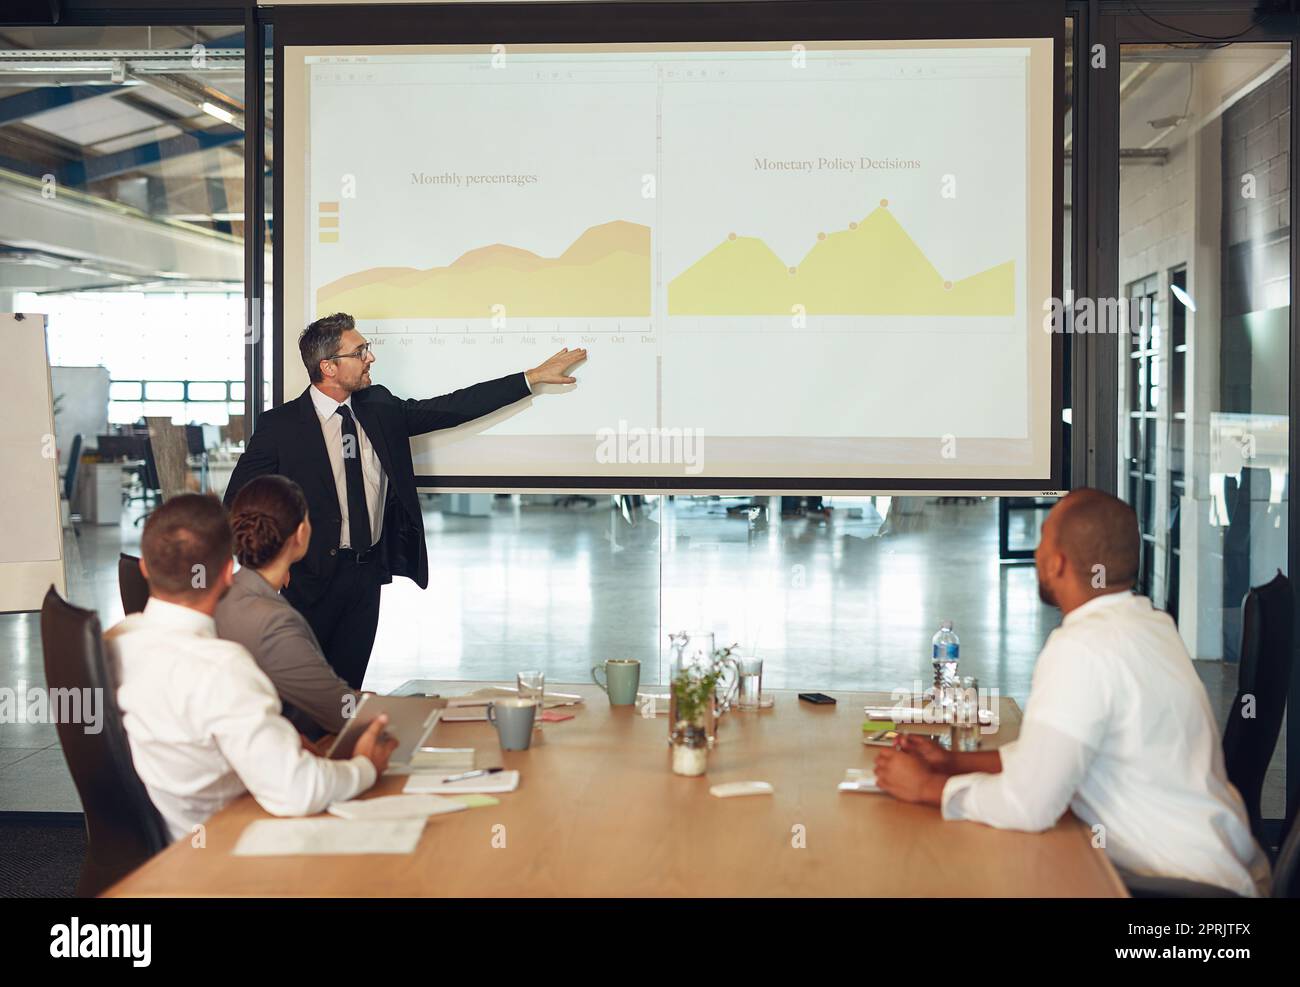 Explaining the companys figures in plain English. an executive giving a presentation on a projection screen to a group of colleagues in a boardroom. Stock Photo